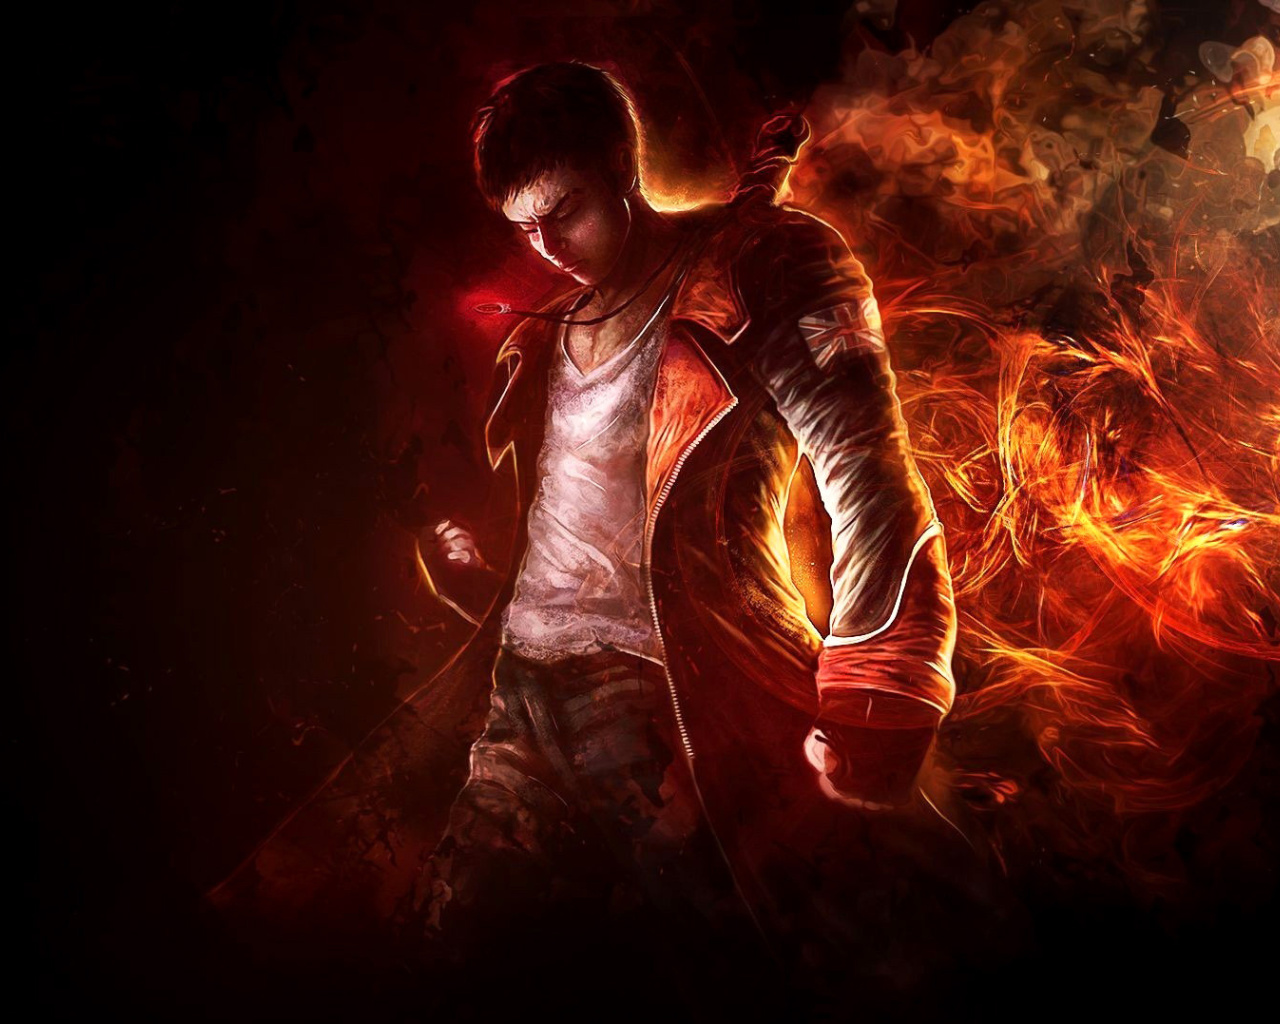 Das Dante from Devil may cry 5 Wallpaper 1280x1024